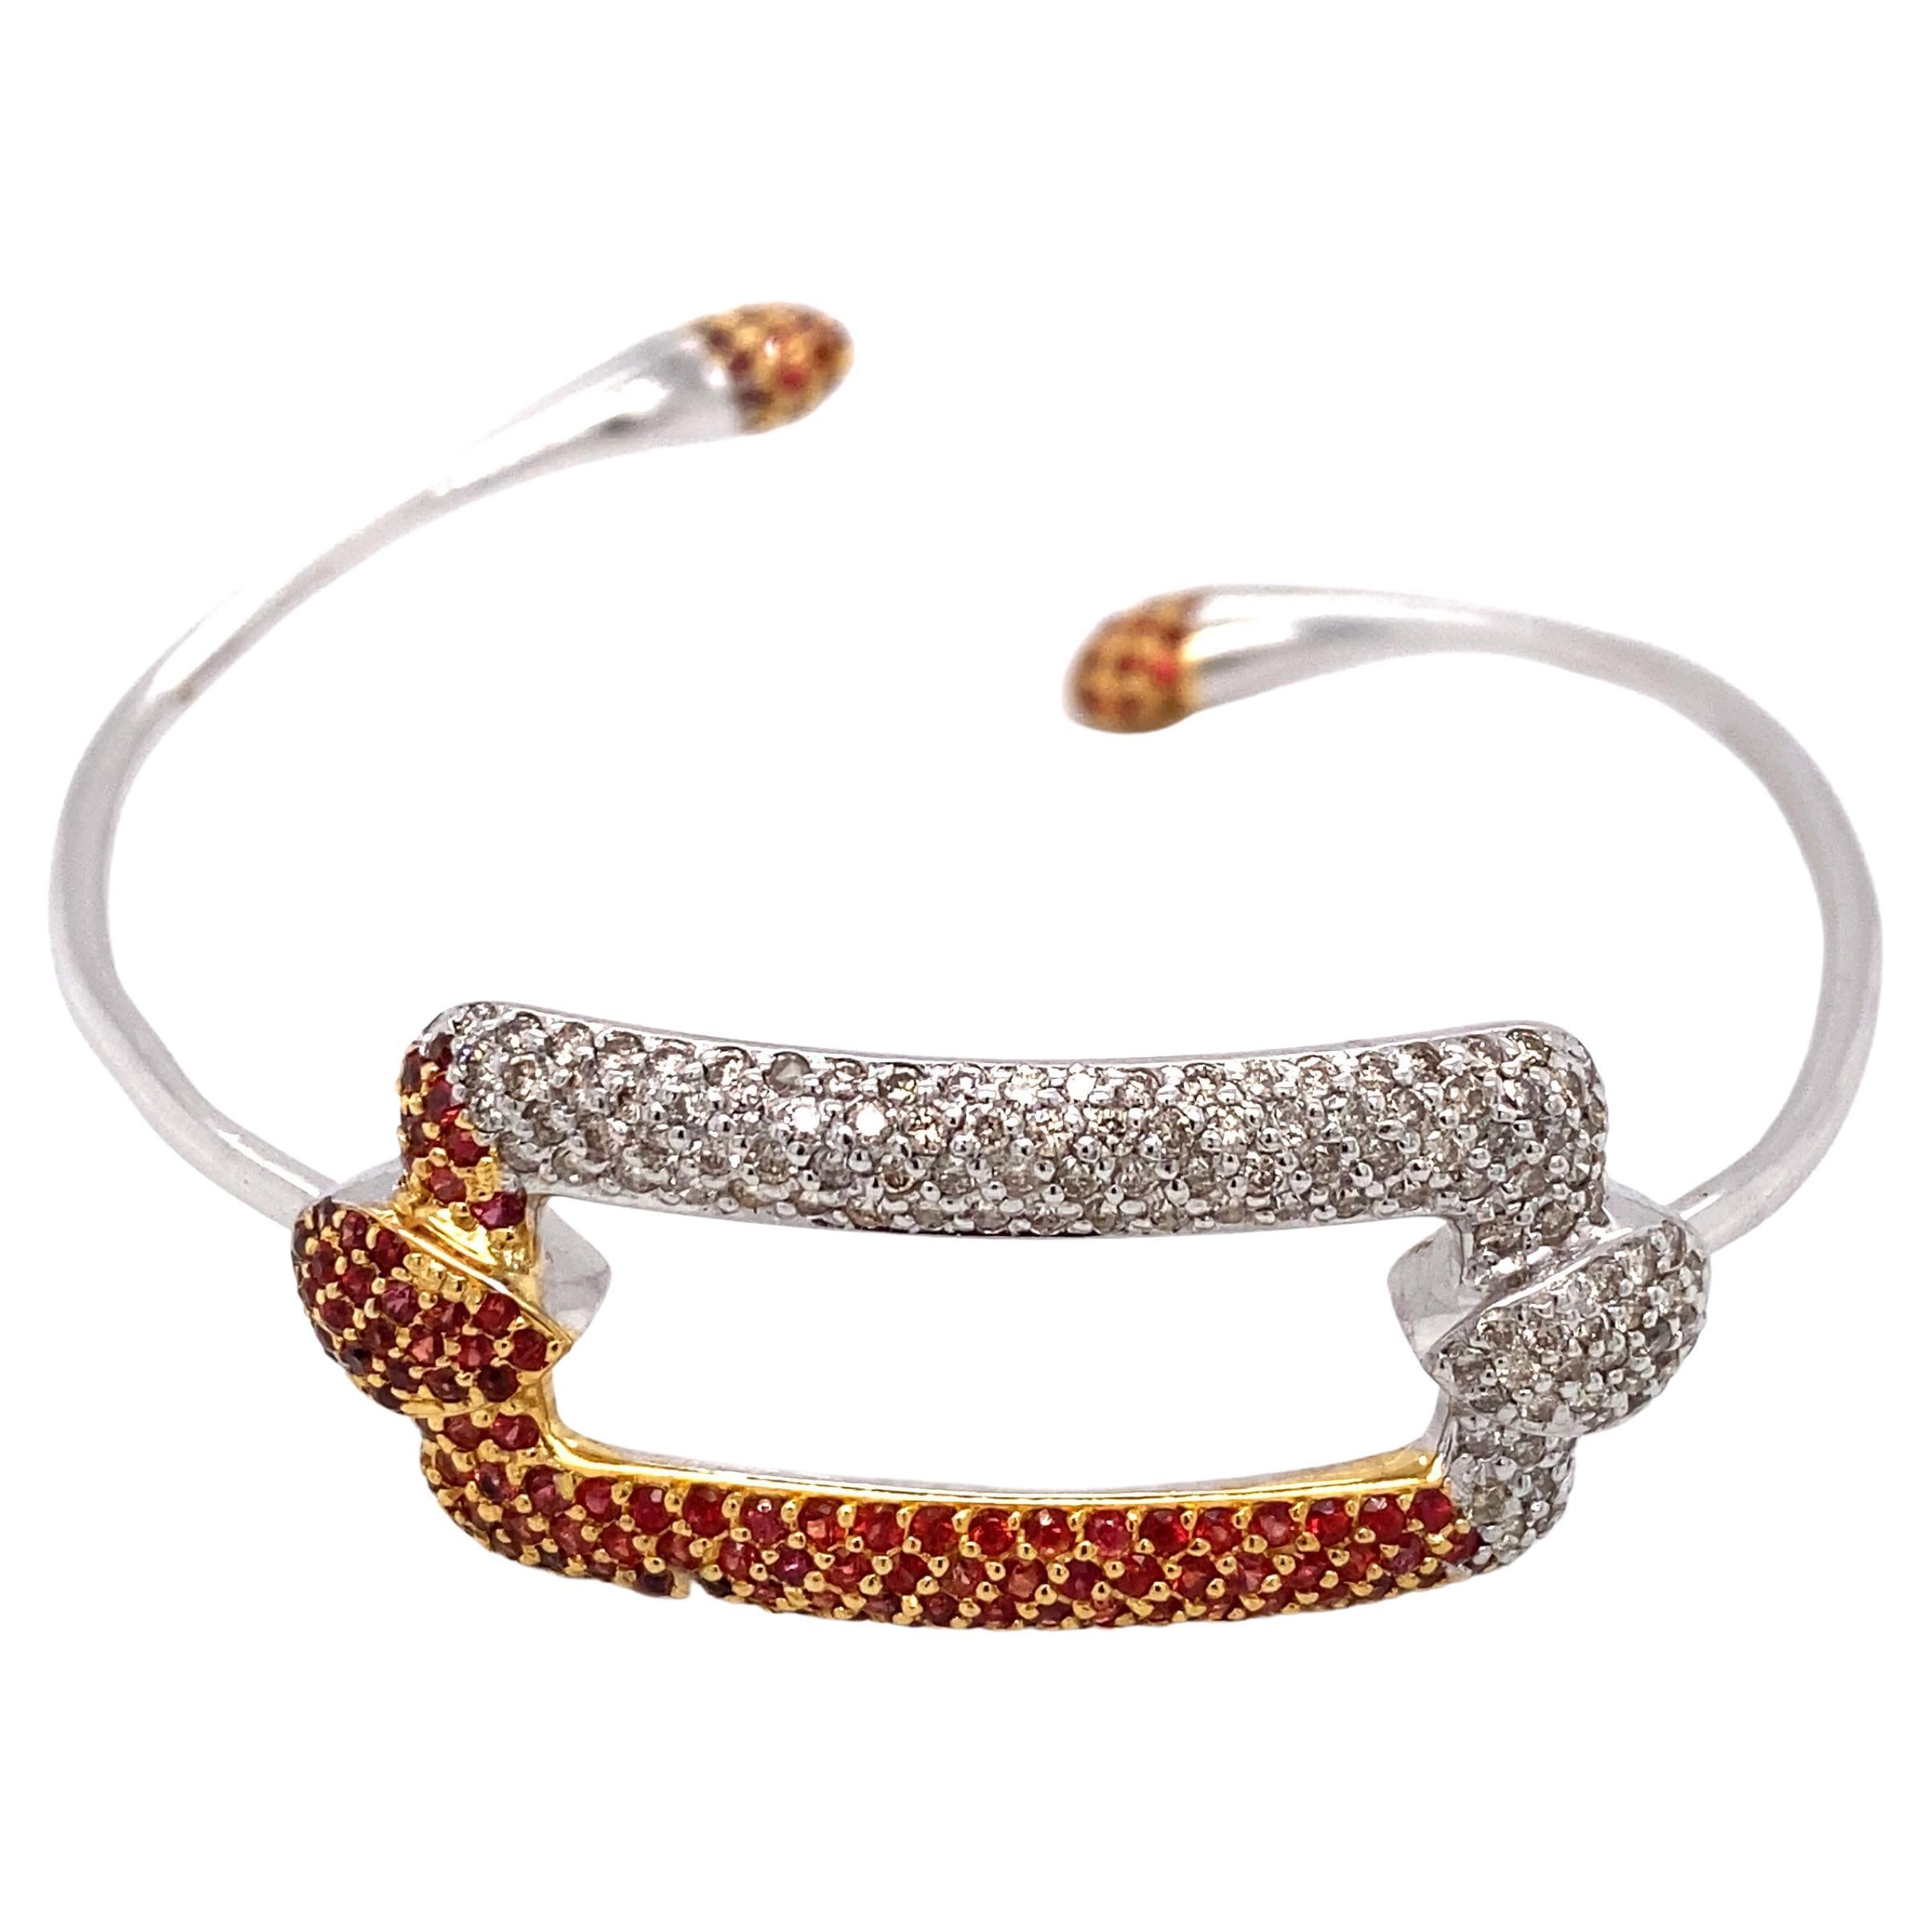 Ruby and Diamond Adjustable Cuff Bracelet in Two Tone 18 Karat Gold